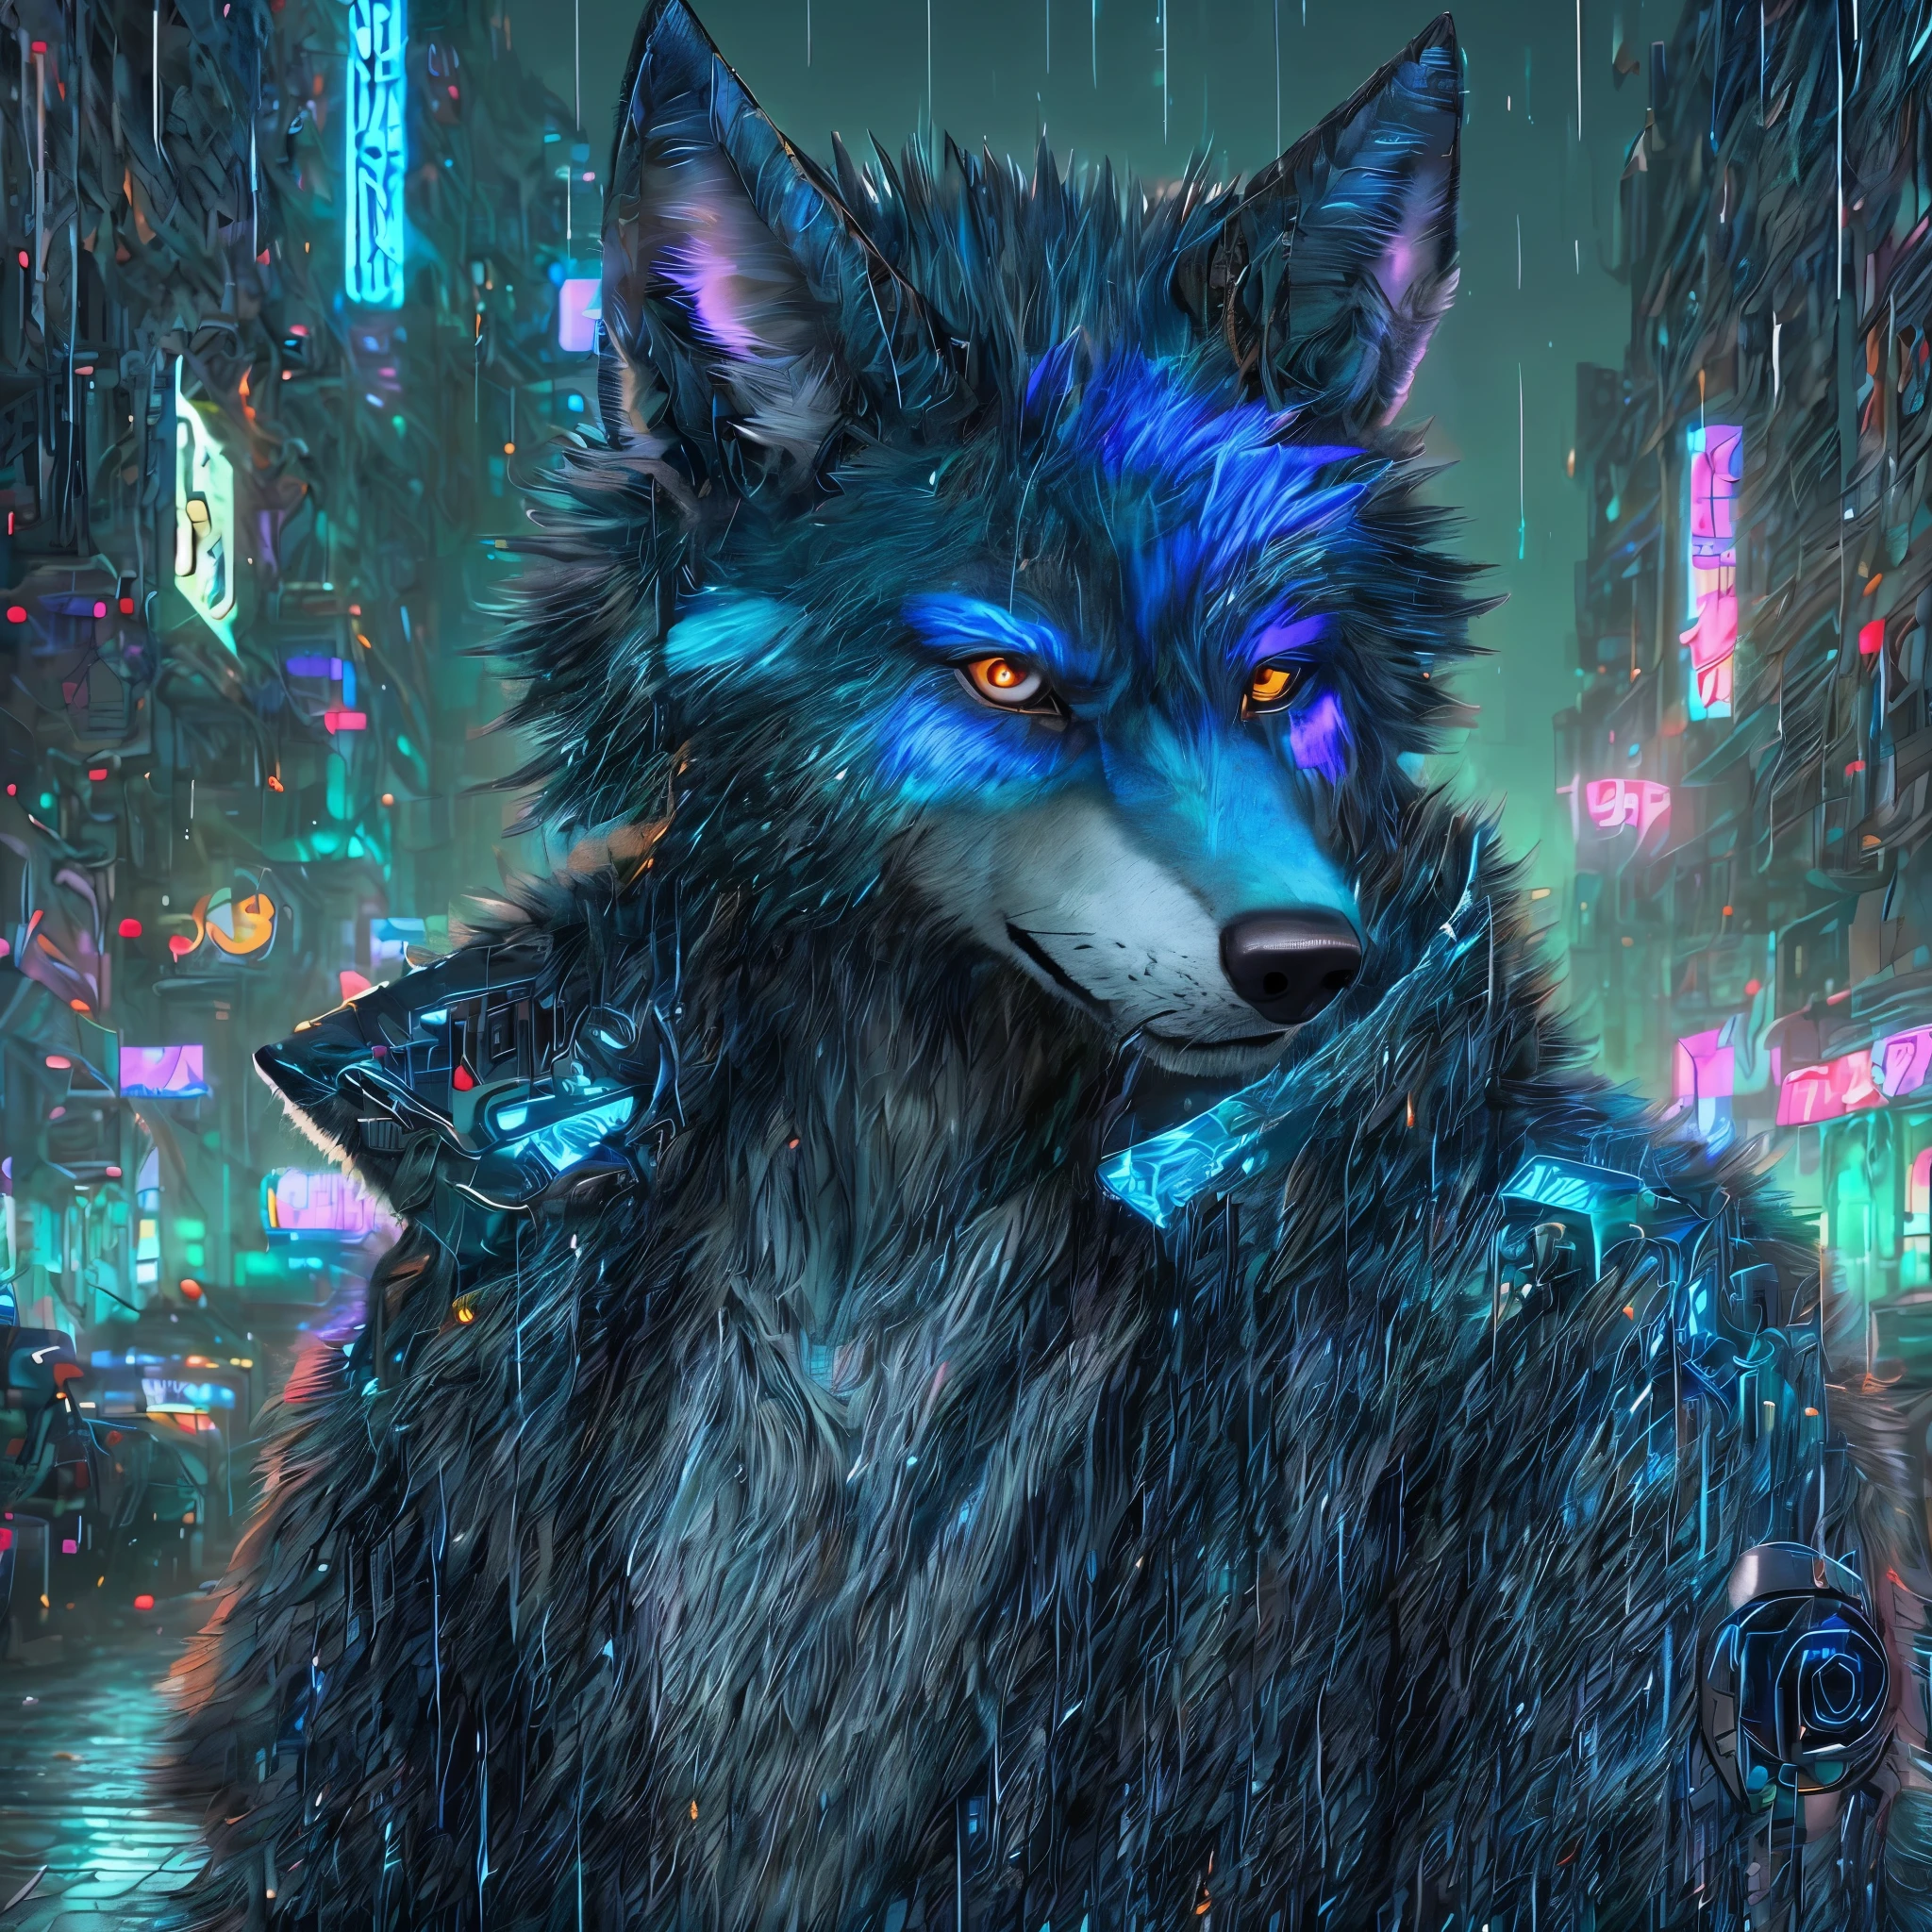 award winning beautiful portrait commission of a male furry anthro Blue wolf fursona with a tail and a cute beautiful attractive 详细的 furry face wearing stylish black cyberpunk clothes in a cyberpunk city at night while it rains.